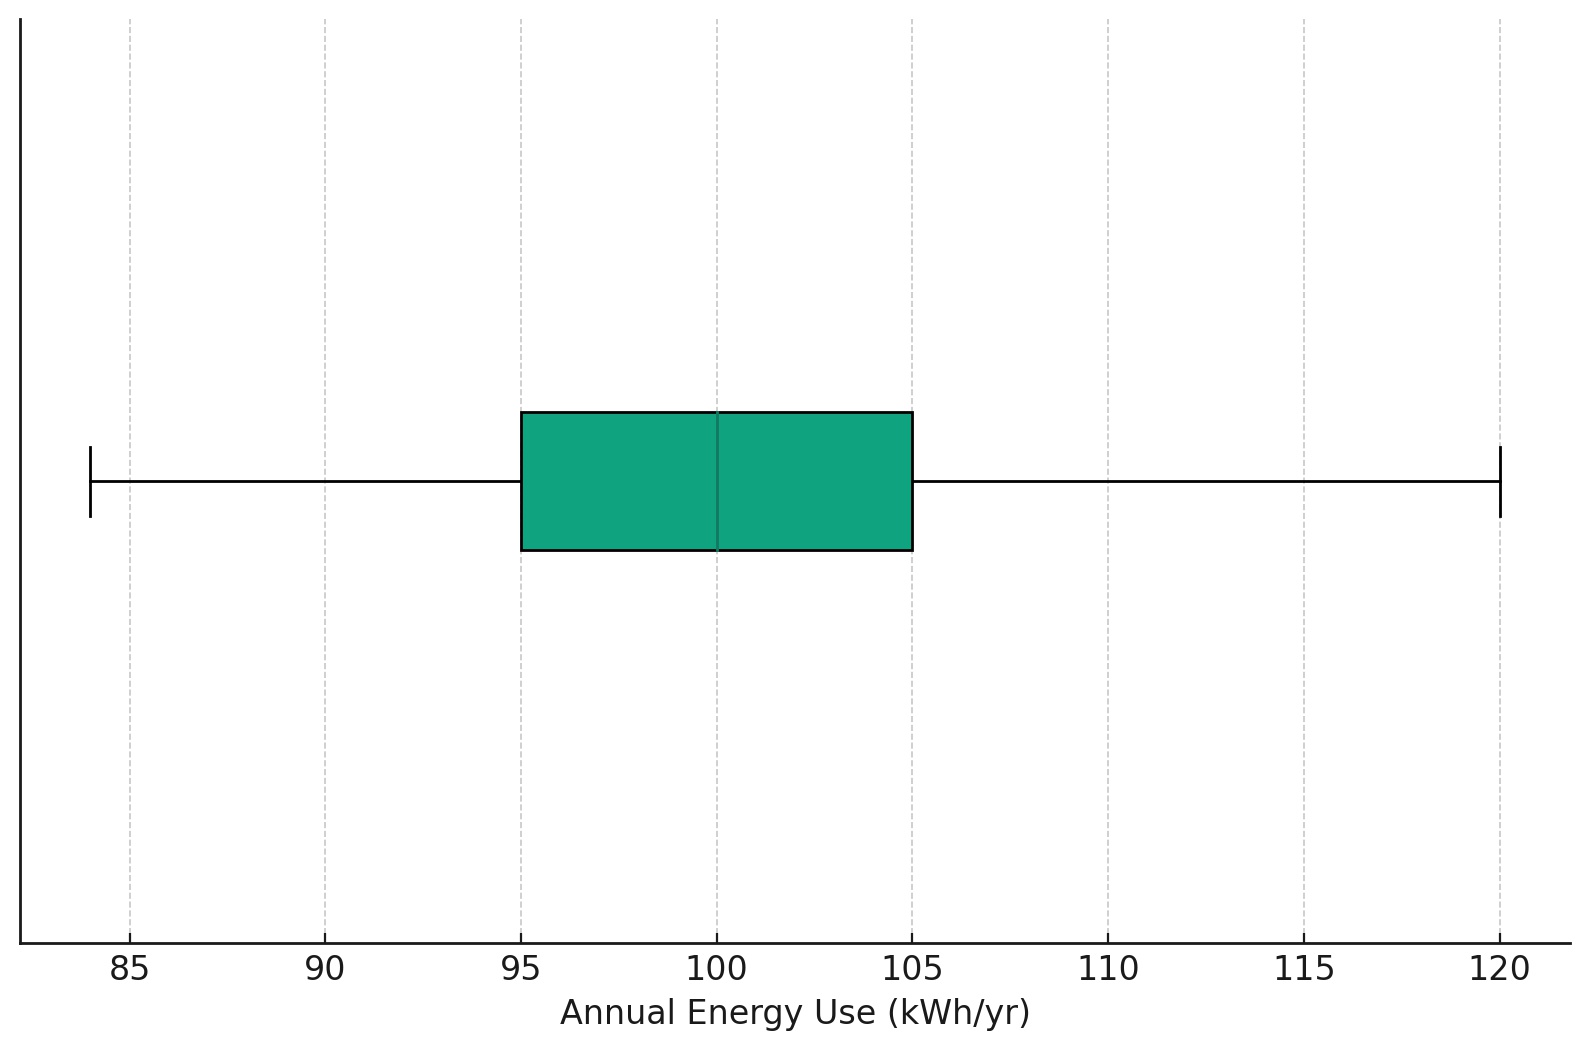 Washing machine power consumption Box Plot chart showing a kWh range from 85 to 120.